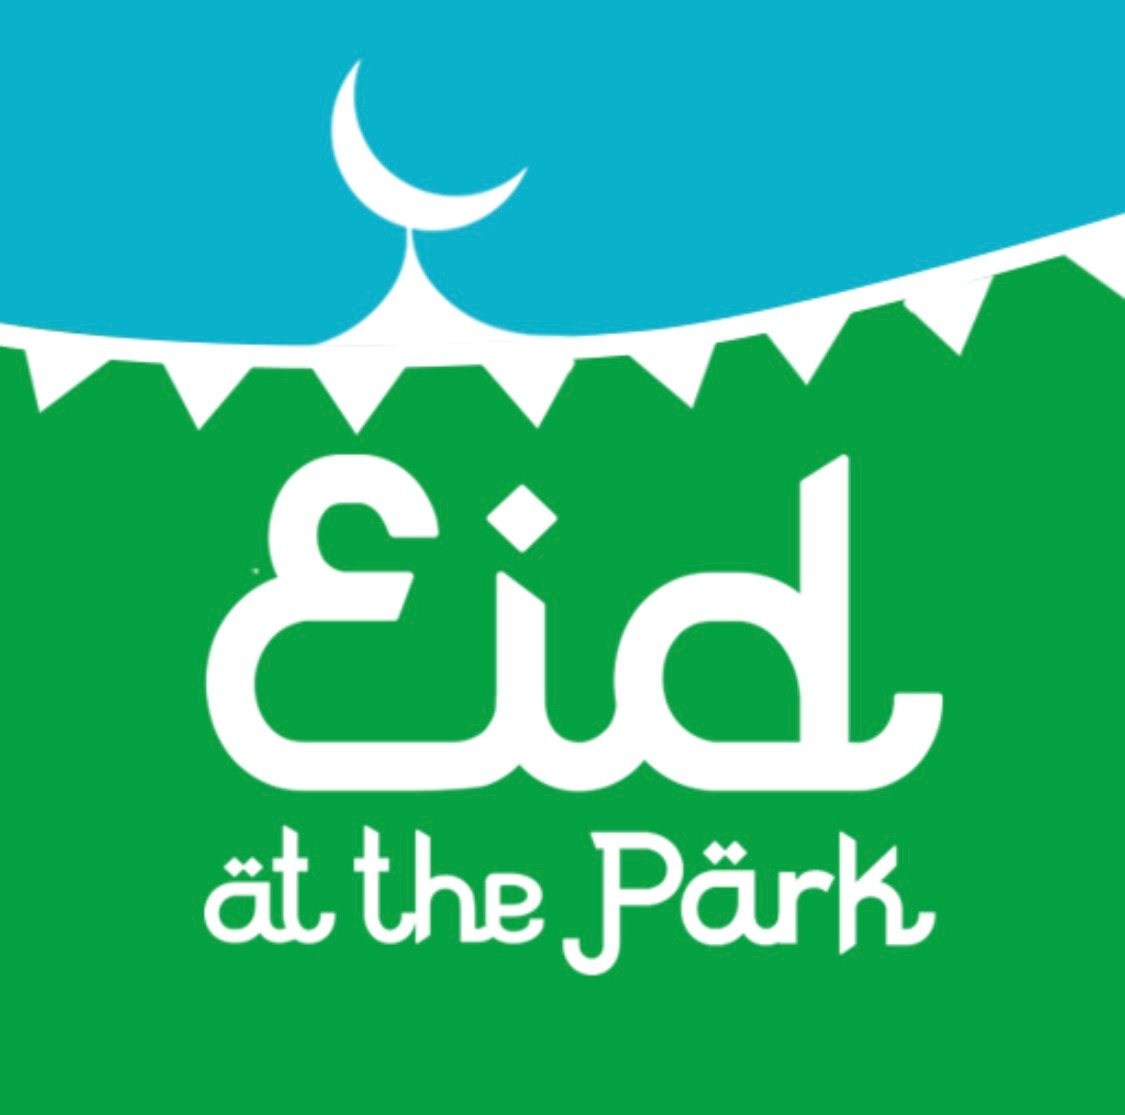 FREE community Eid Festival taking place annually in Southwark, London. Please check website for updates.